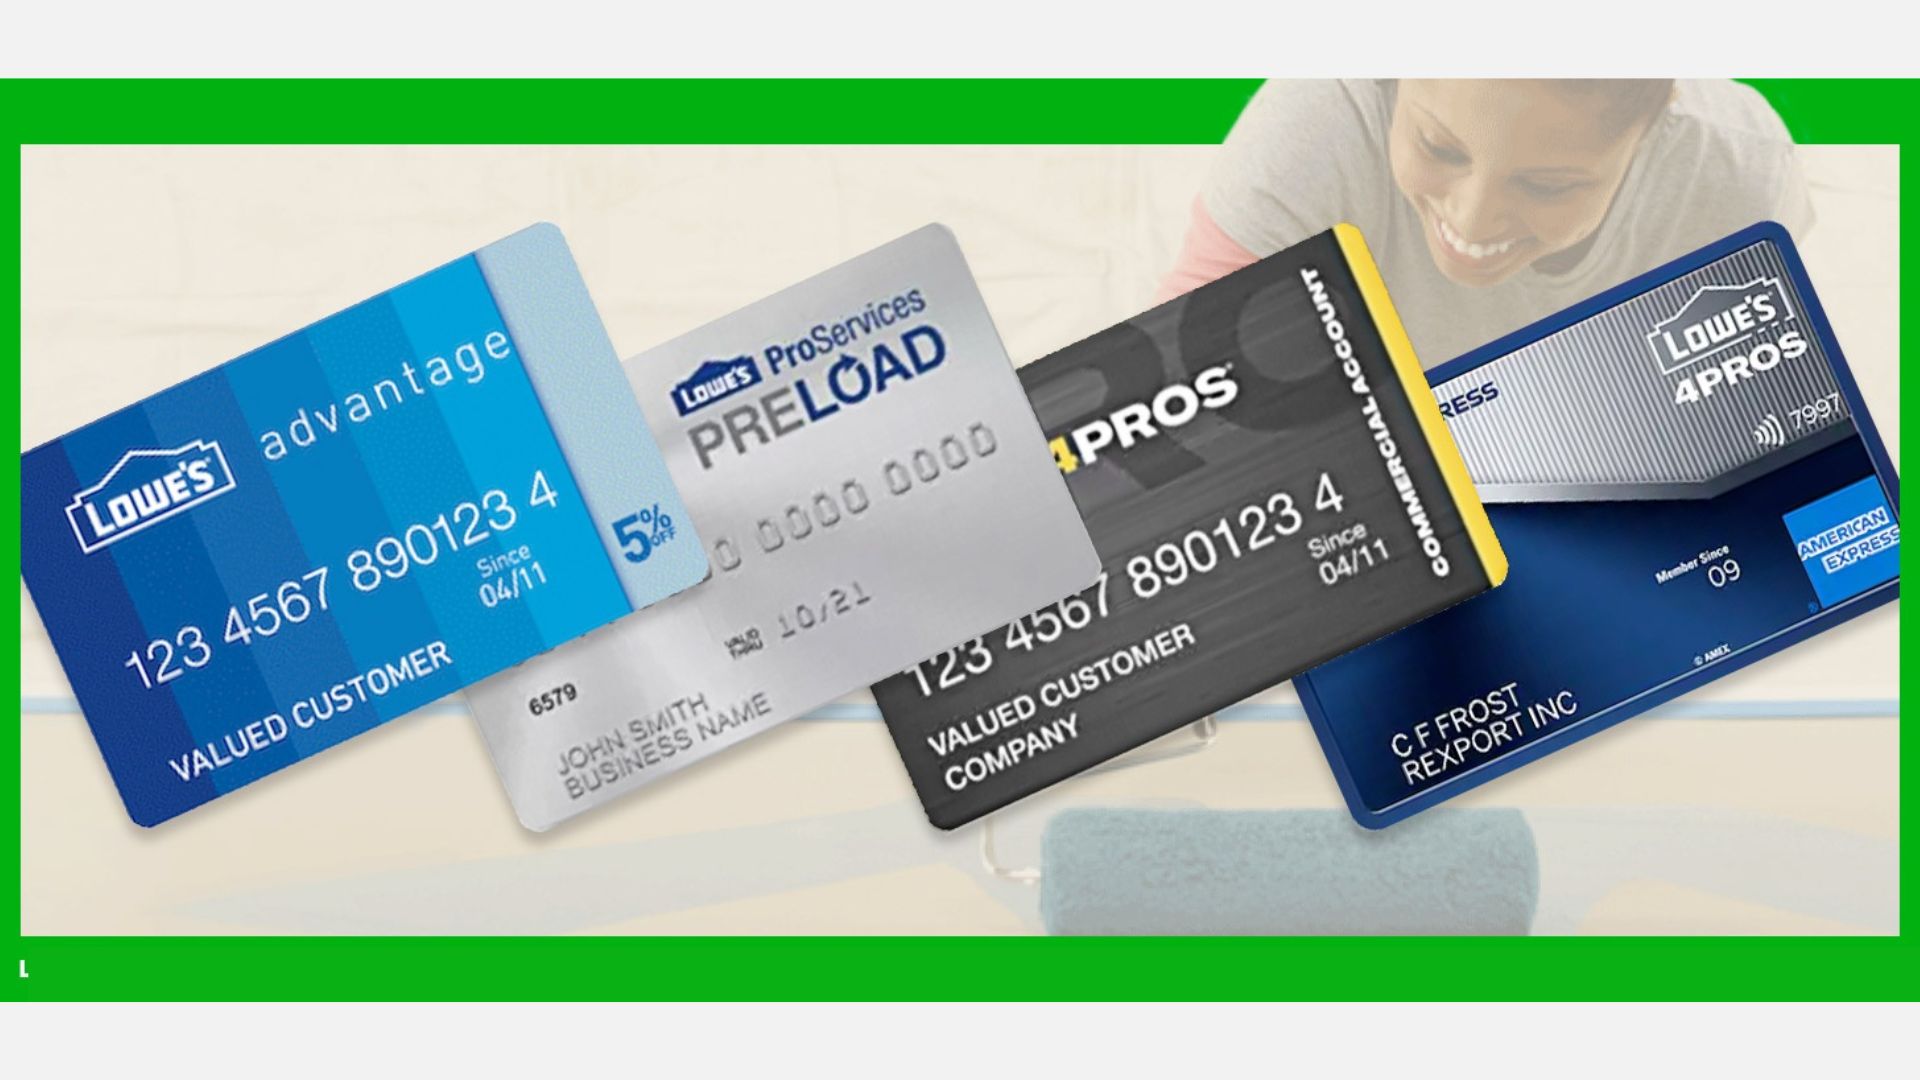 Lowe's $3500 Business Credit Card